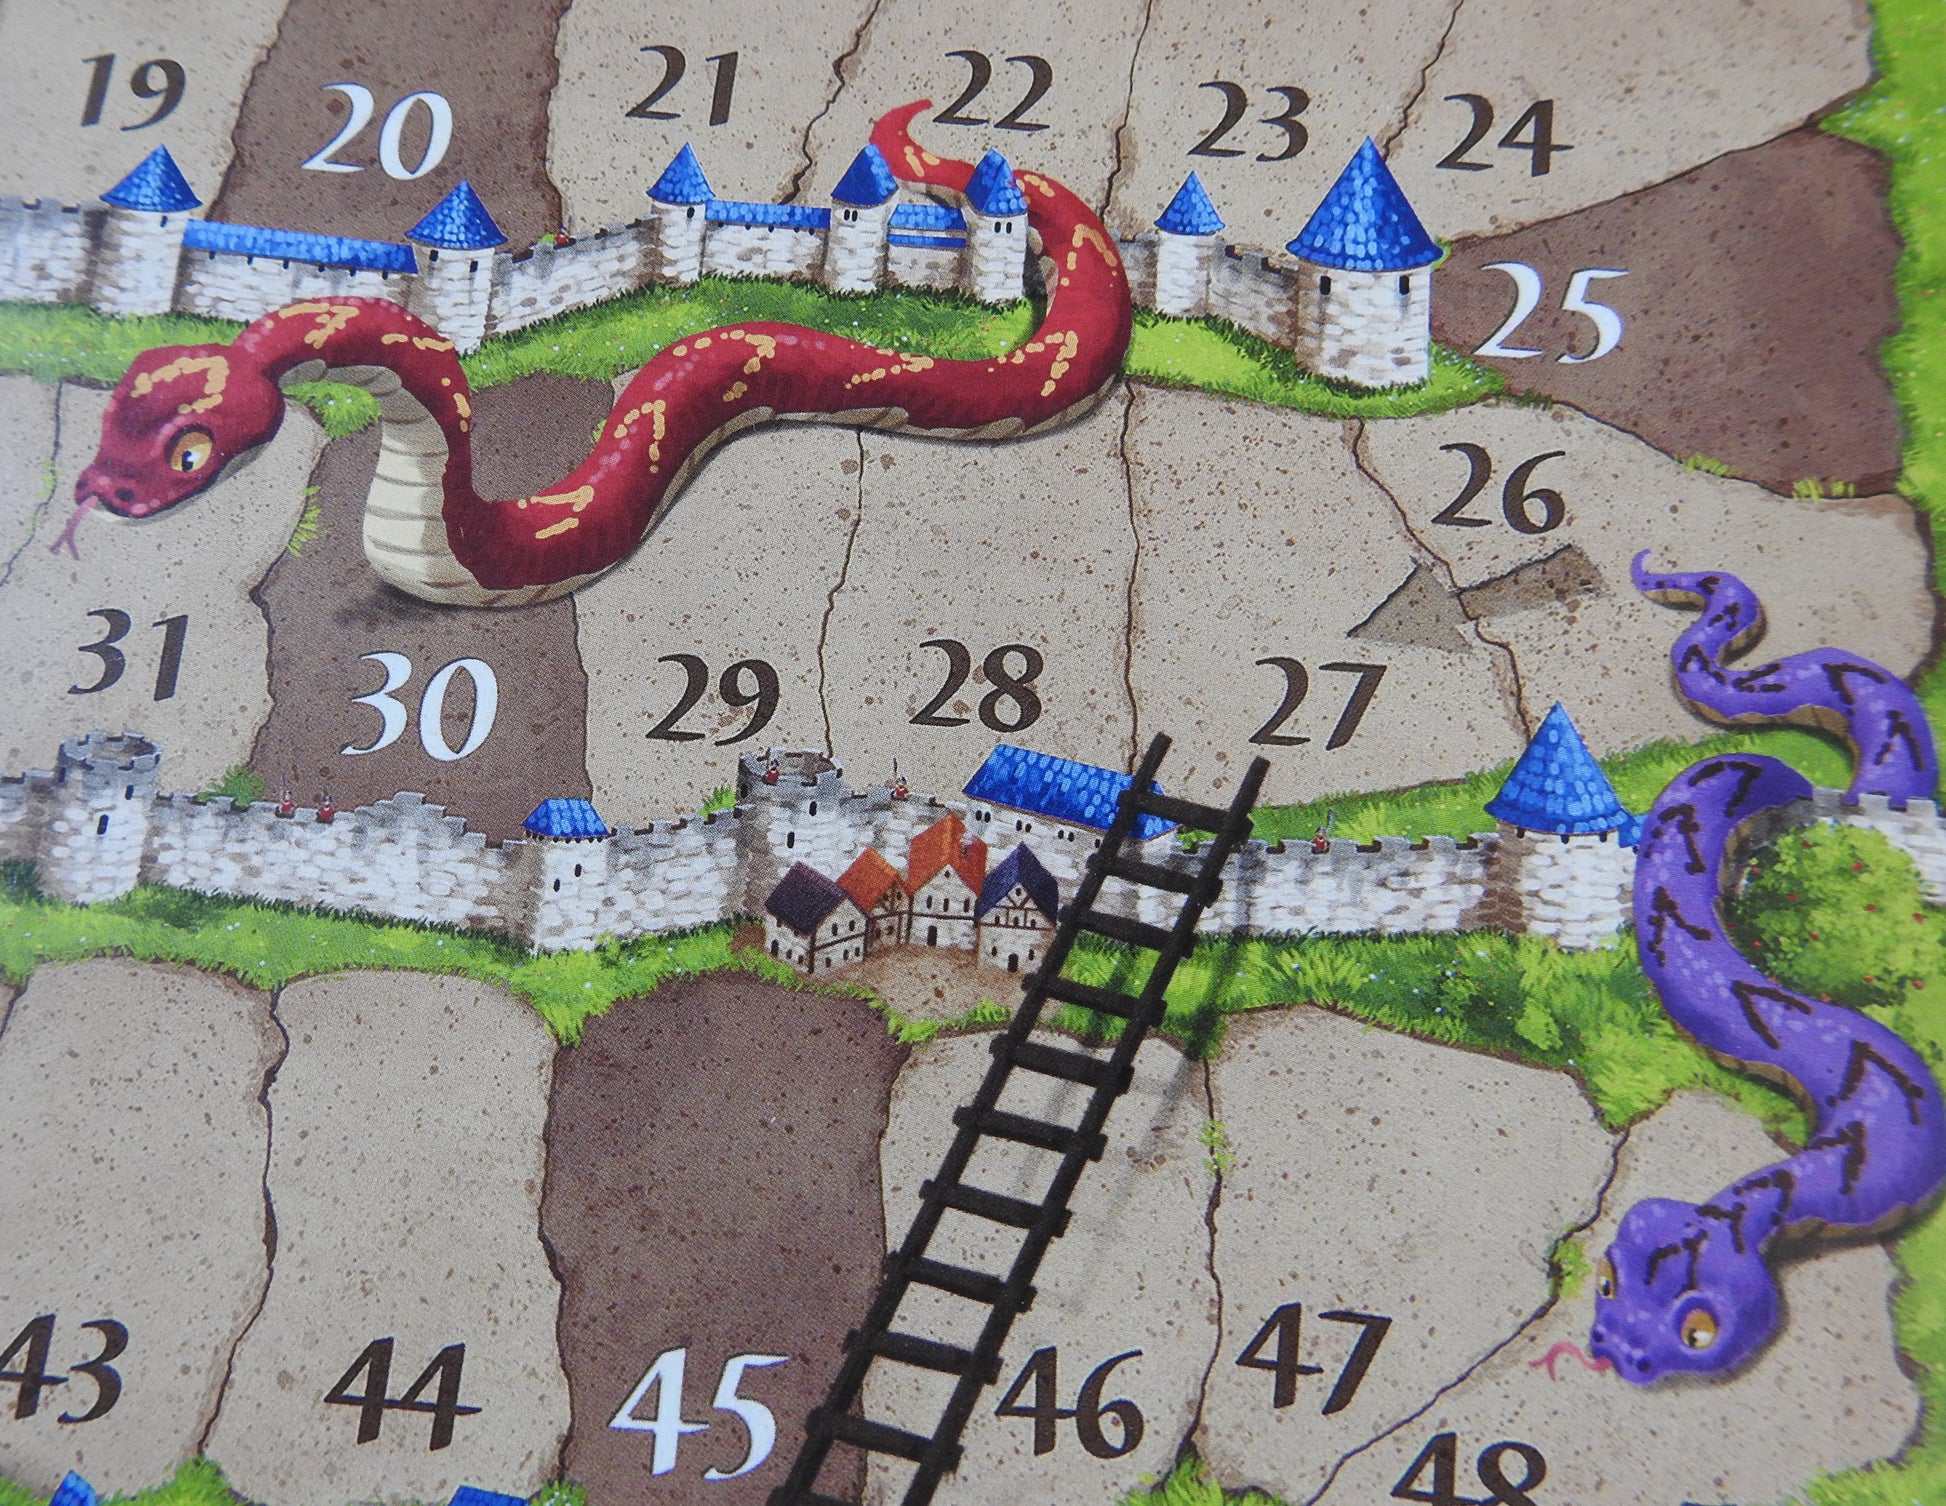 Close-up view showing a red snake, a purple snake and a ladder in this Snakes & Ladders Scoreboard mini expansion and accessory for Carcassonne.